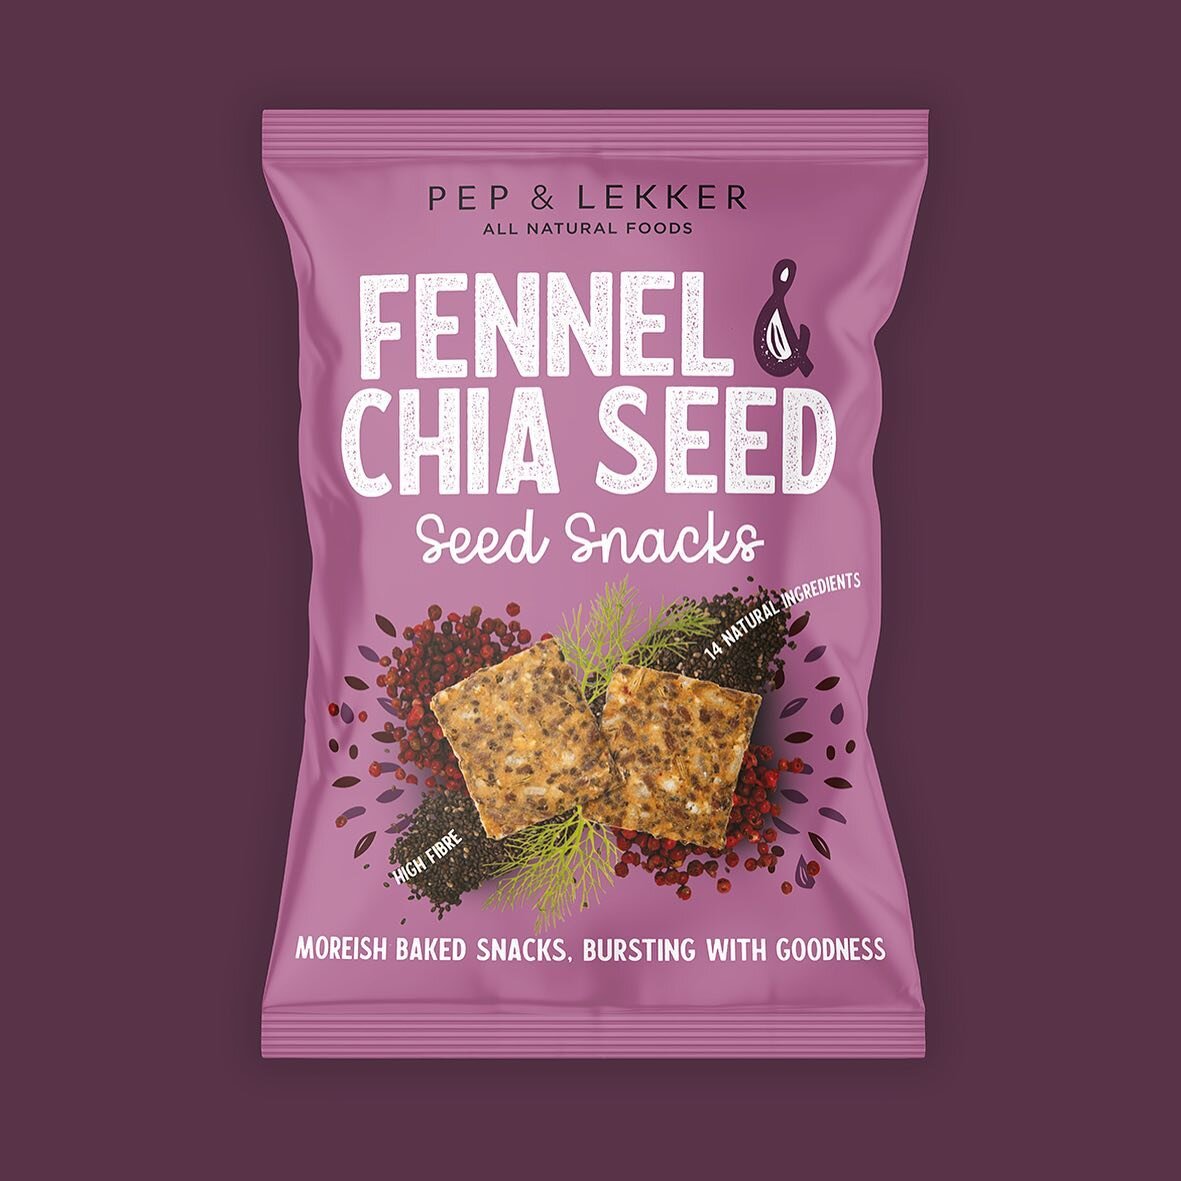 Don&rsquo;t just fill the gap!
.
All our seed snacks contain over 14 100% natural ingredients handpicked for their nutritional value and taste.
.
We love all our flavours equally BUT the unique taste of fennel seeds combined with the nutritional punc